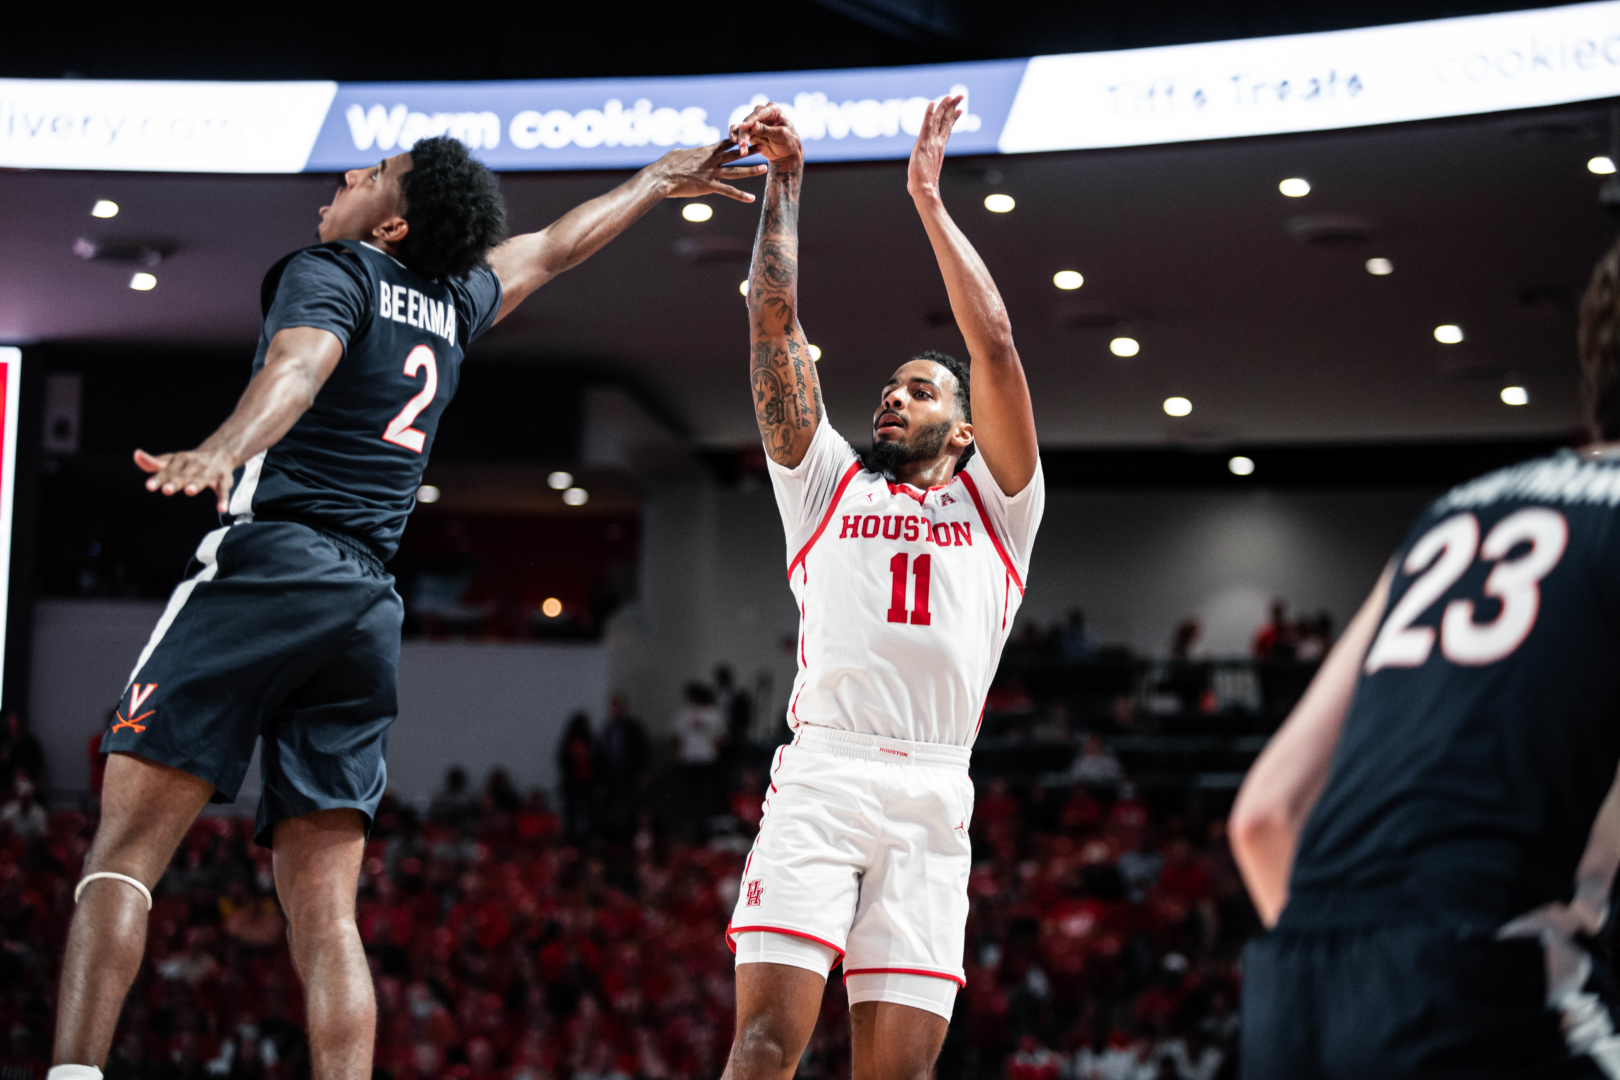 UH guard Kyler Edwards hit five 3-pointers, finishing with 18 points in the Cougars' victory over Virginia on Tuesday night. | James Schillinger/The Cougar